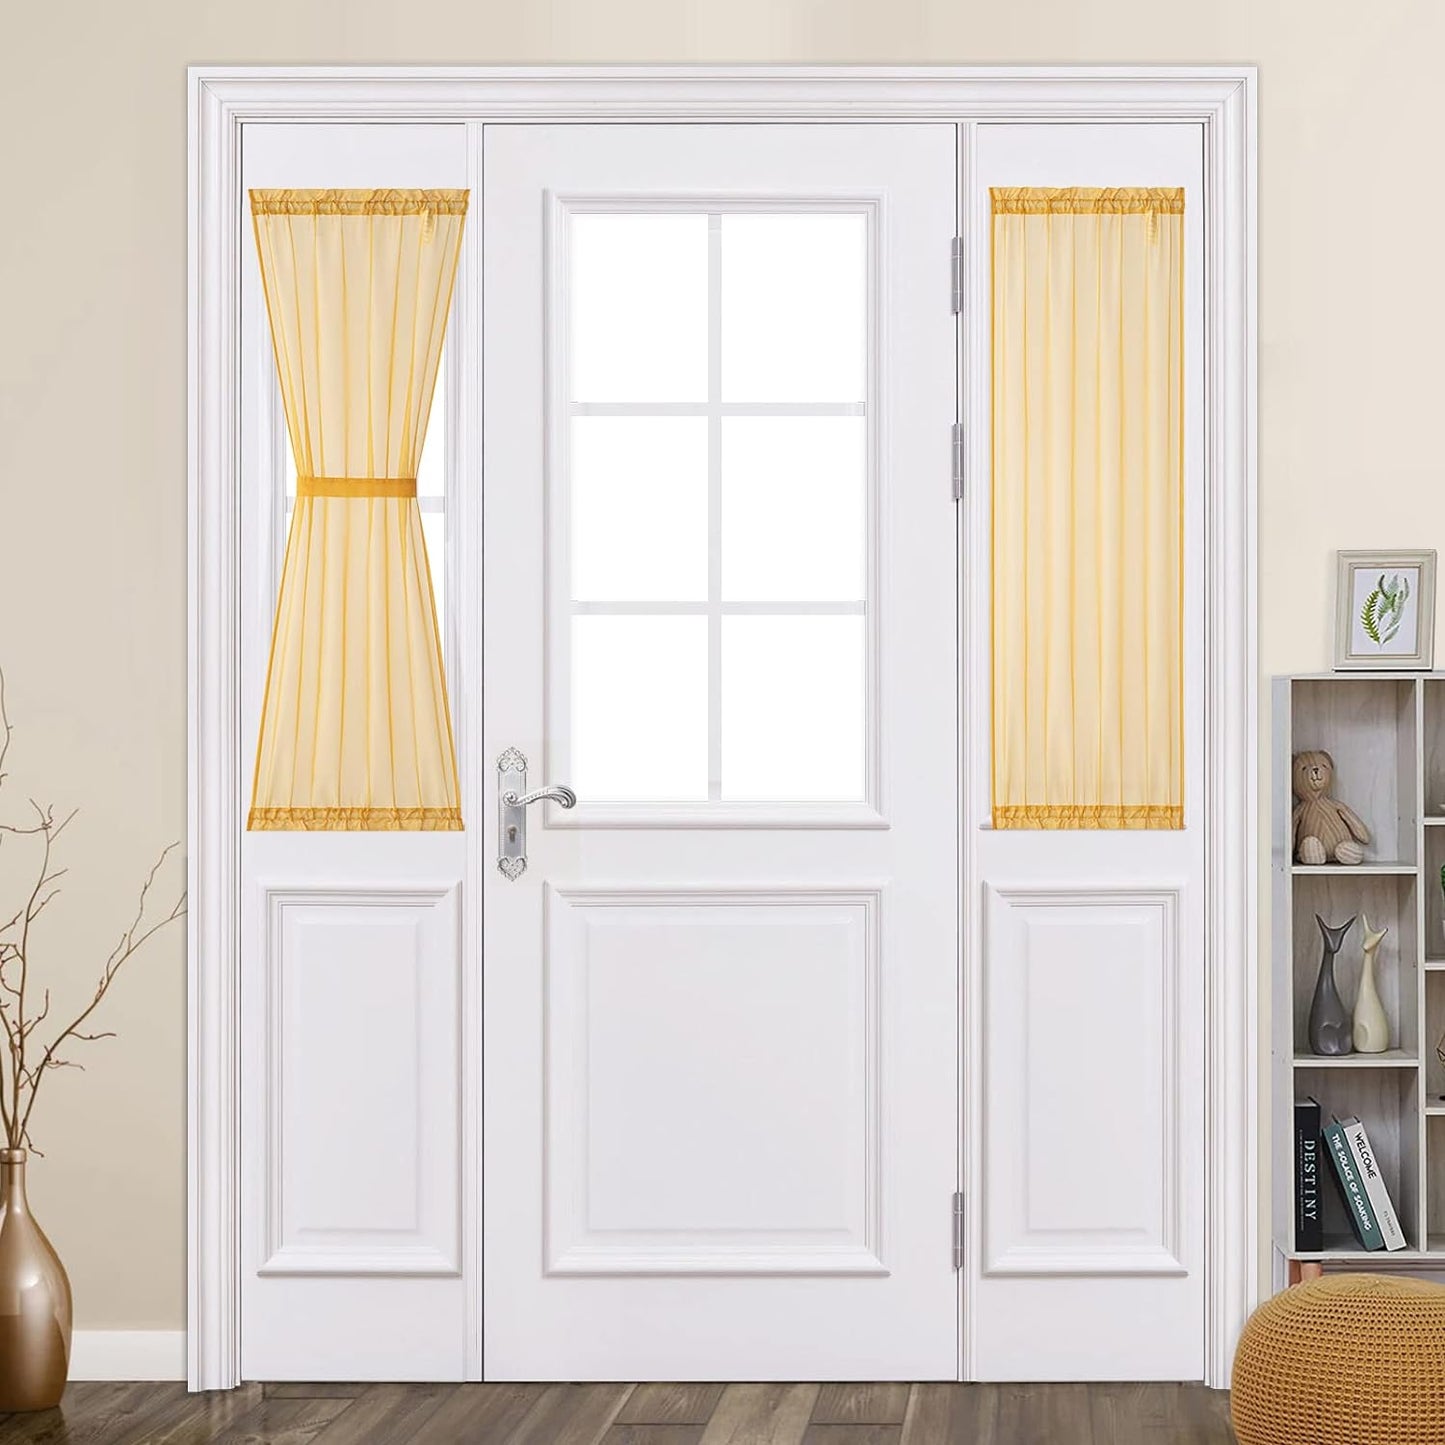 MIULEE French Door Sheer Curtains for Front Back Patio Glass Door Light Filtering Window Treatment with 2 Tiebacks 54 Wide and 72 Inches Length, White, Set of 2  MIULEE Gold 25"W X 40"L 